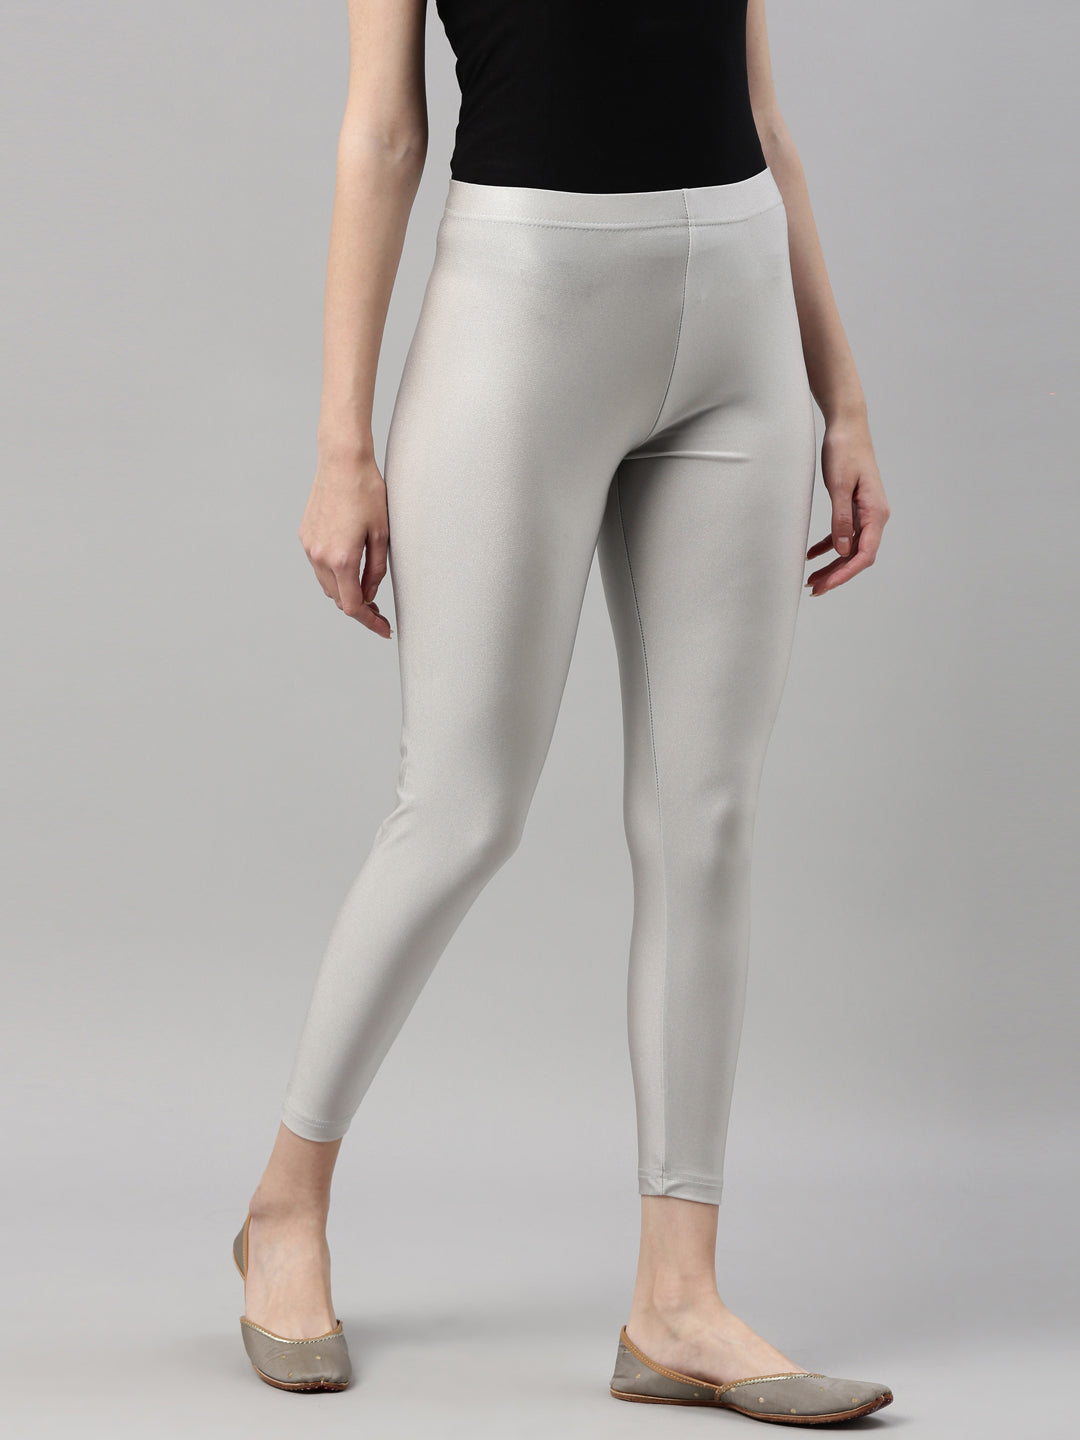 Prisma Shimmer Leggings - Super Gold: Stylish and Comfortable